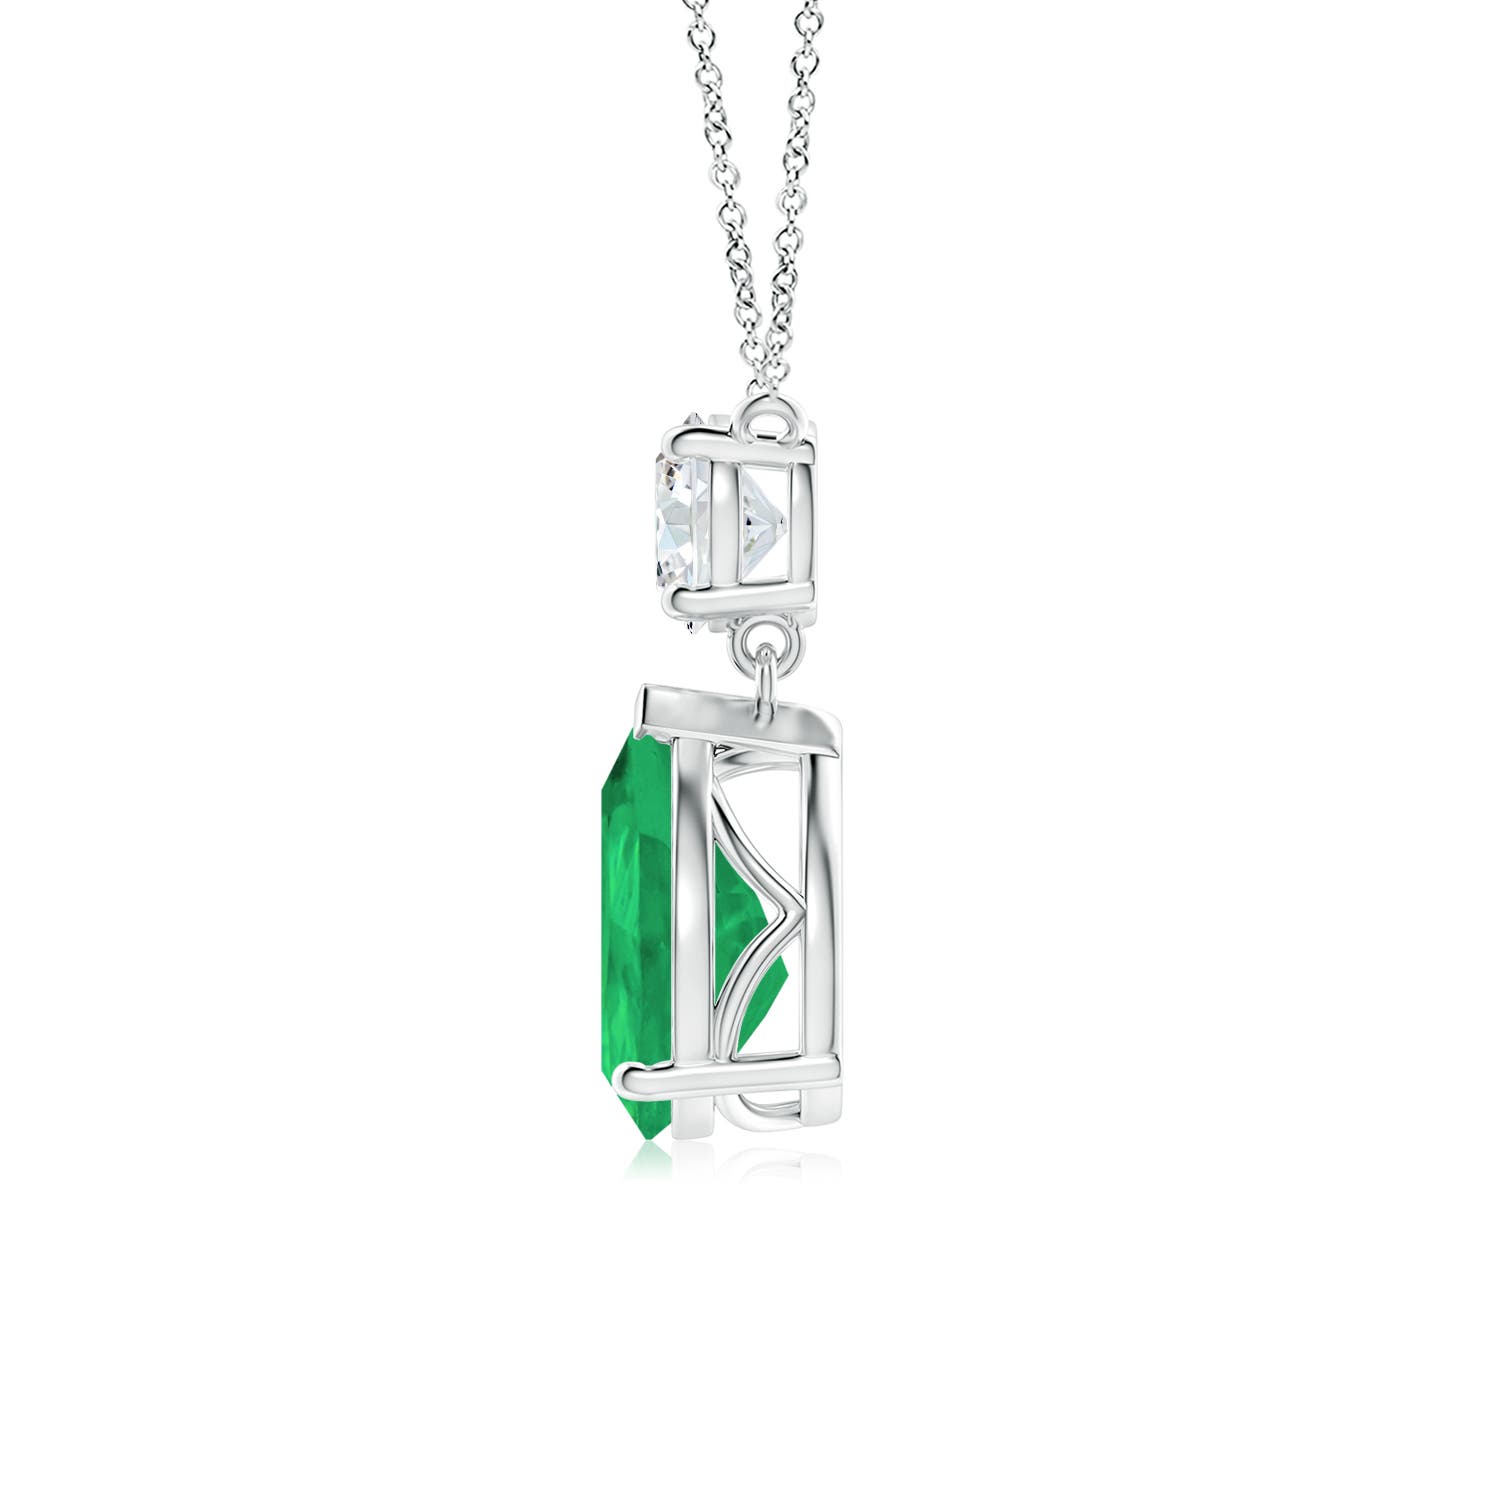 A - Emerald / 3 CT / 14 KT White Gold